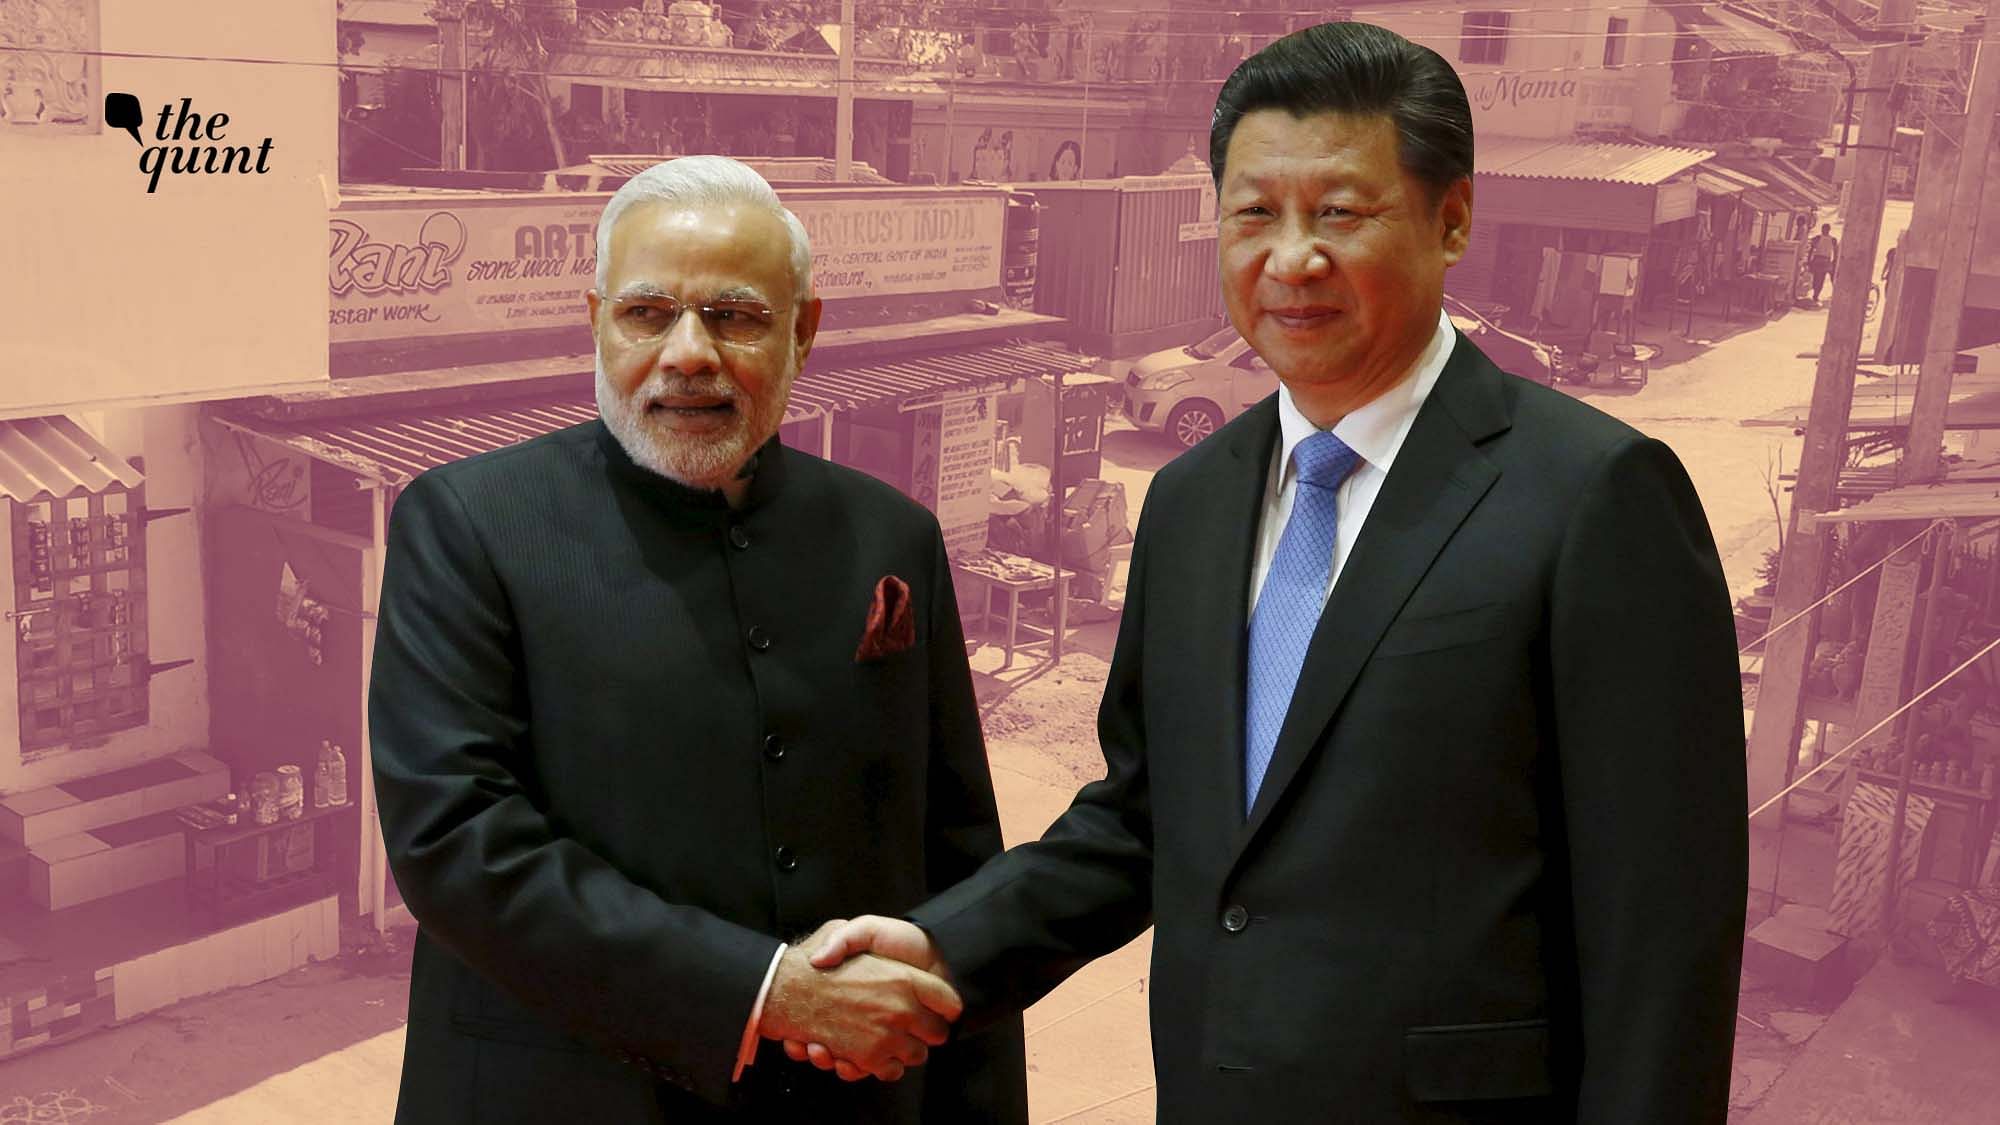 Mahabalipuram will soon be the centre of the world’s attention as the leaders of two of the global emerging powers – Prime Minister Narendra Modi and Chinese Premier Xi Jinping – are set to hold talks there on 11-13 October.